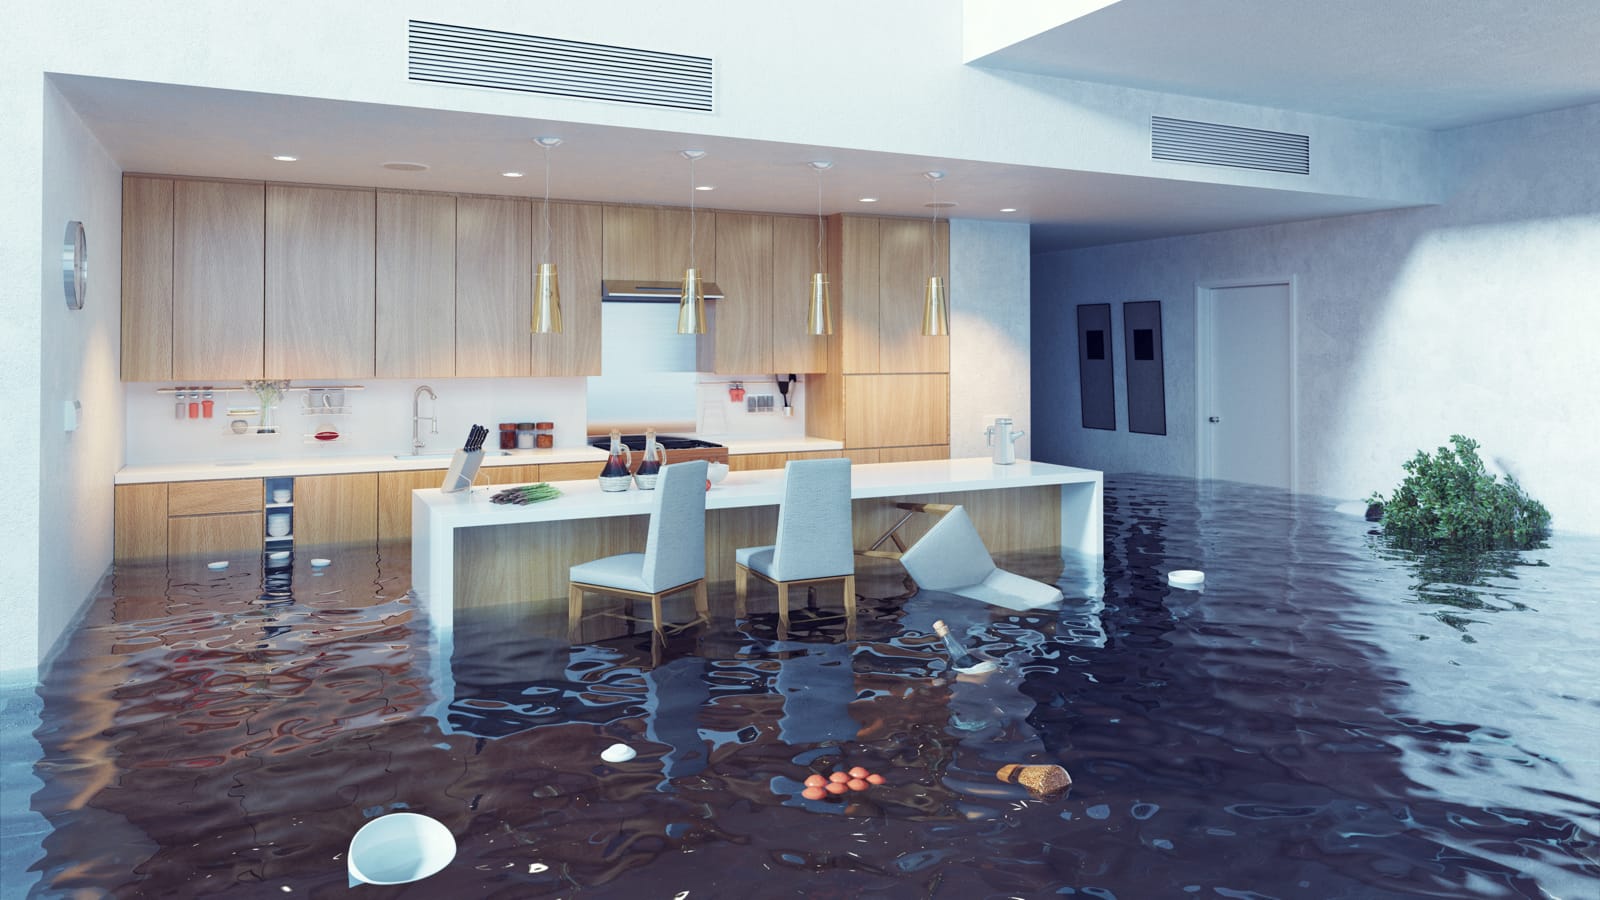 Kitchen filled with flood water